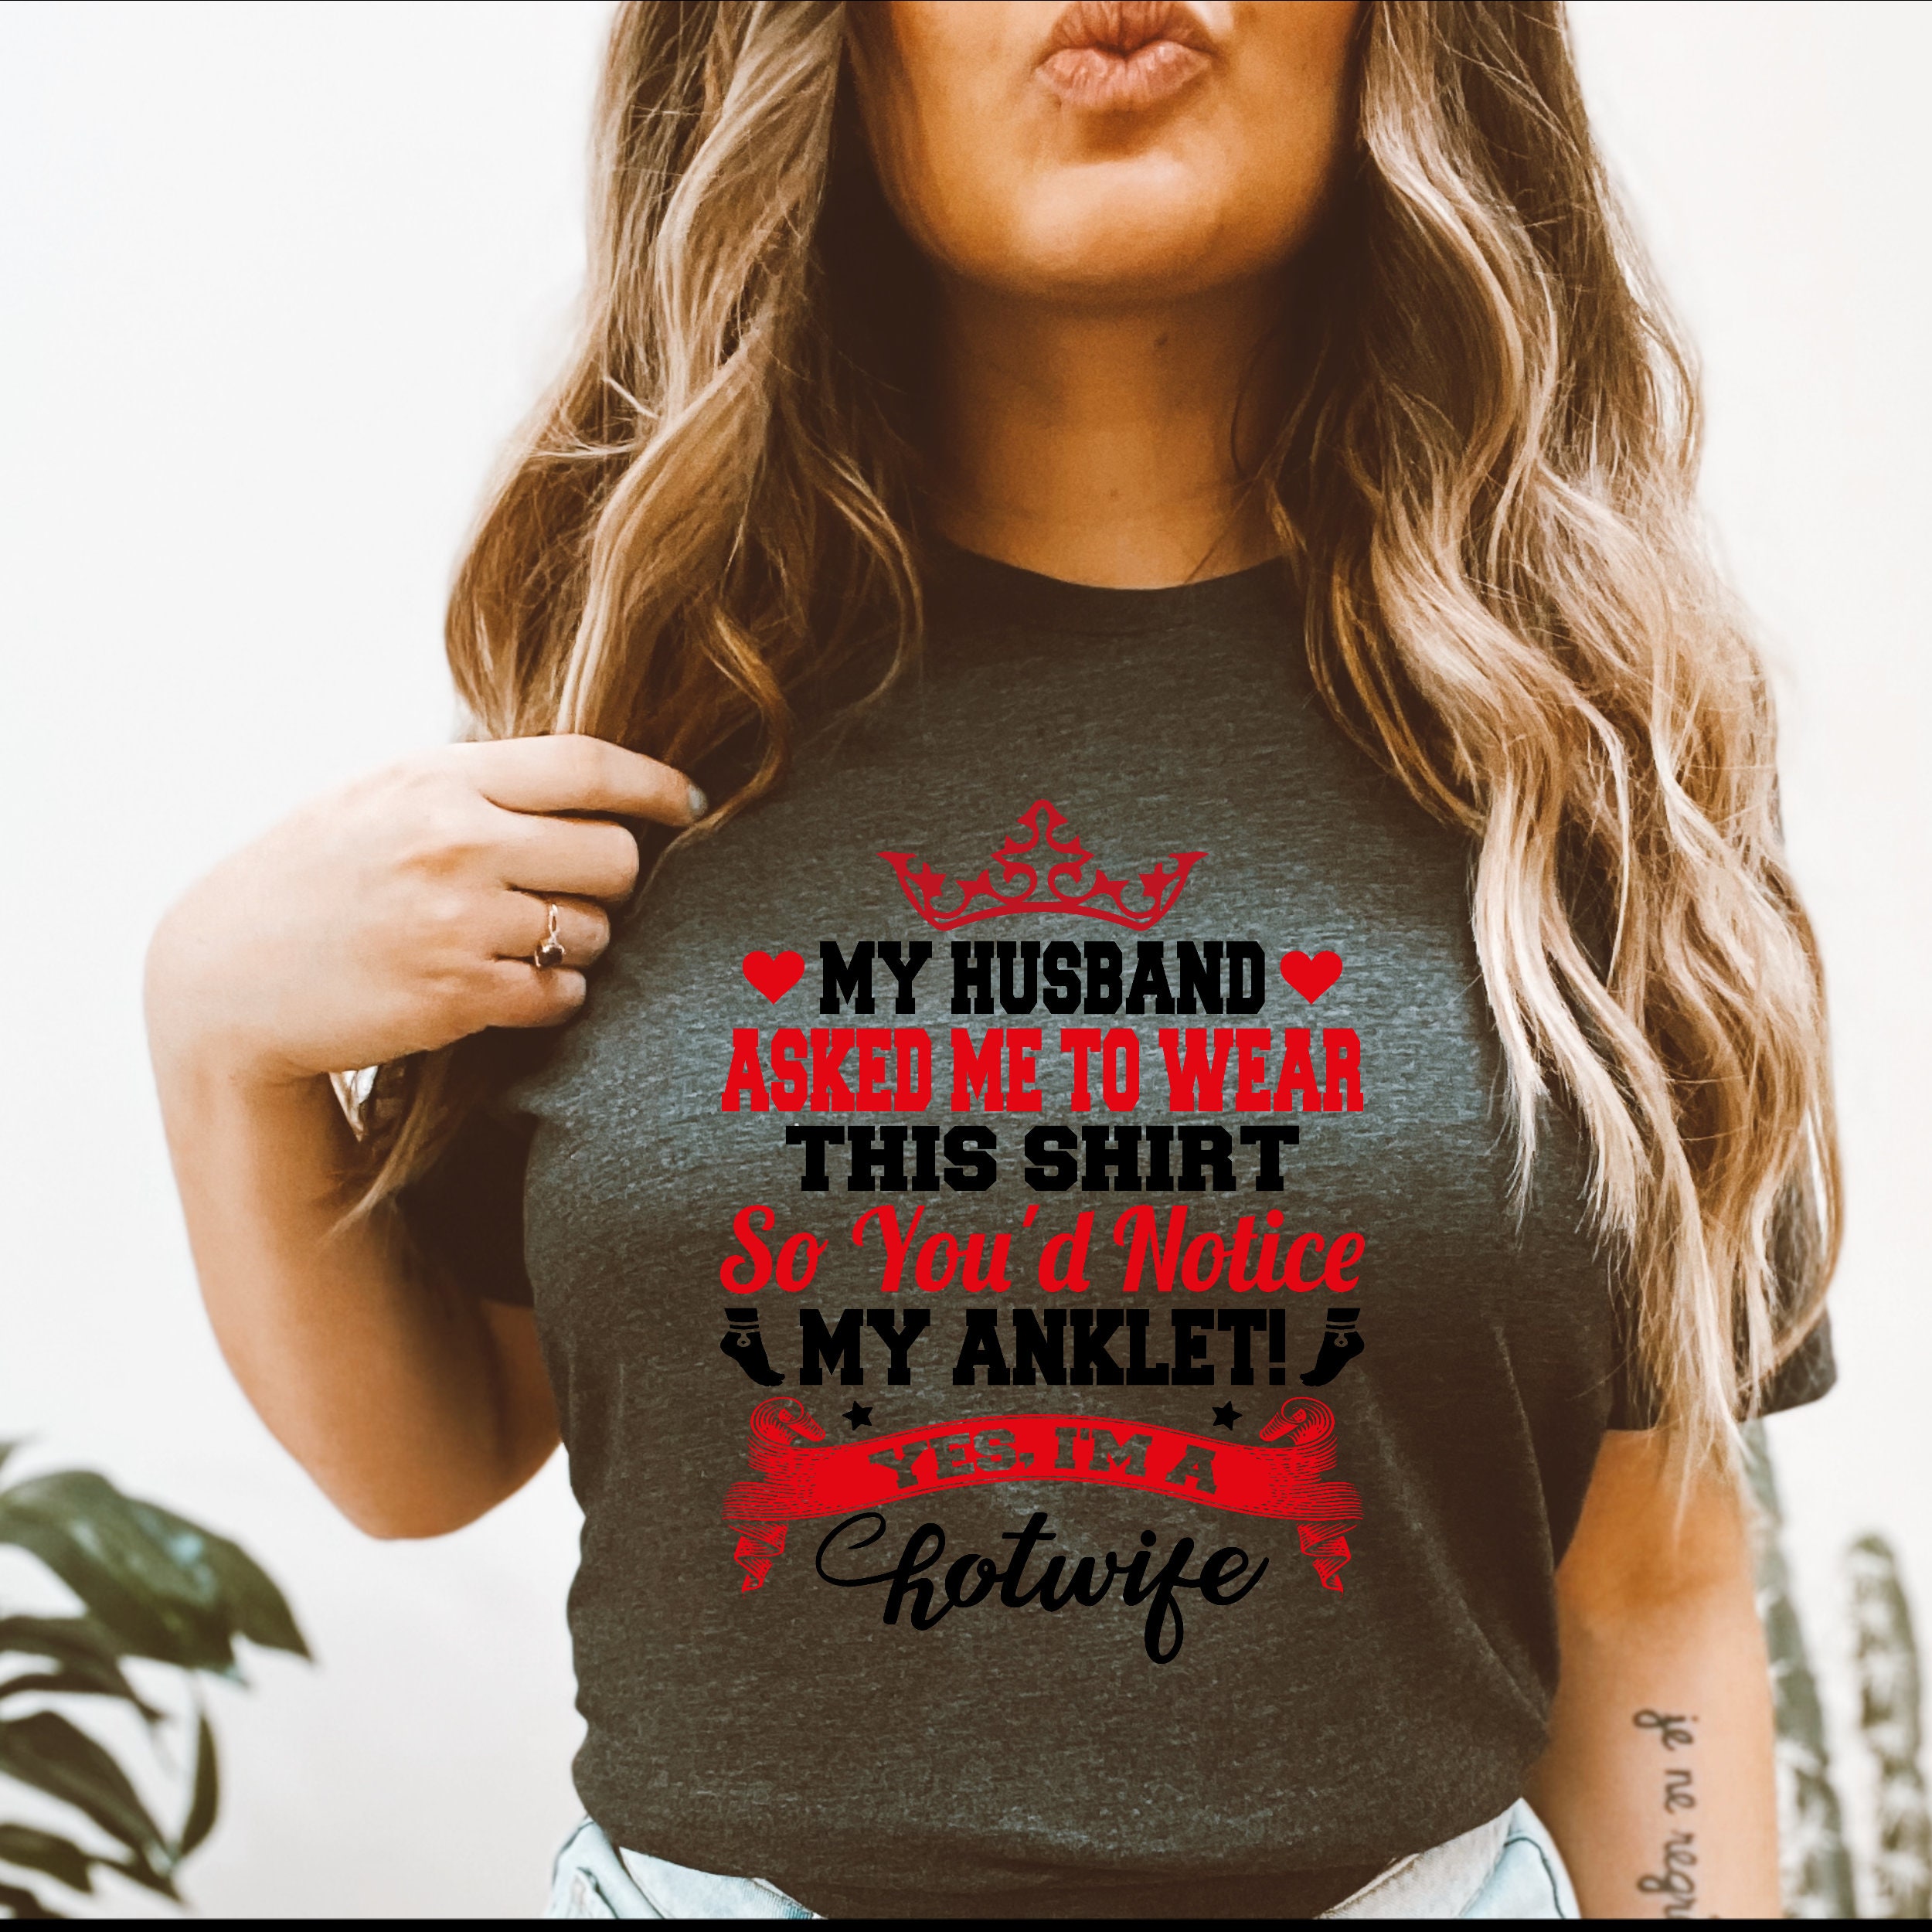 Hotwife T-shirt/sexy Gifts for Him/wife image photo